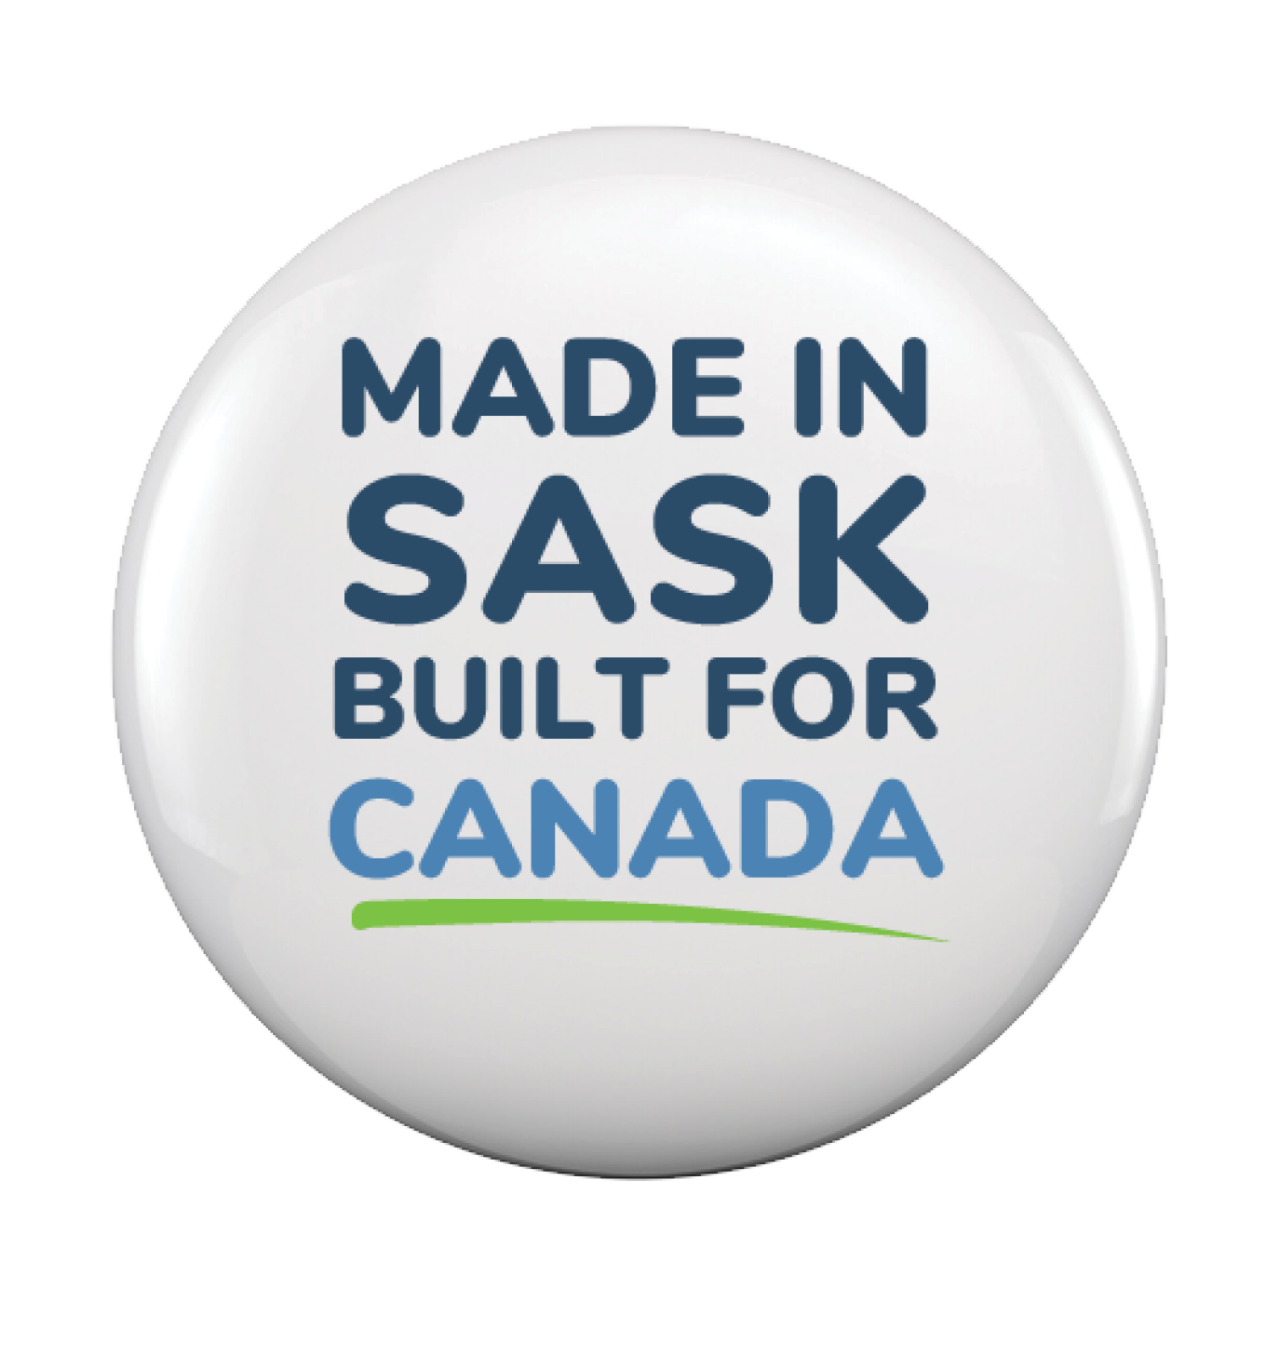 Made in Sask, Built for Canada button